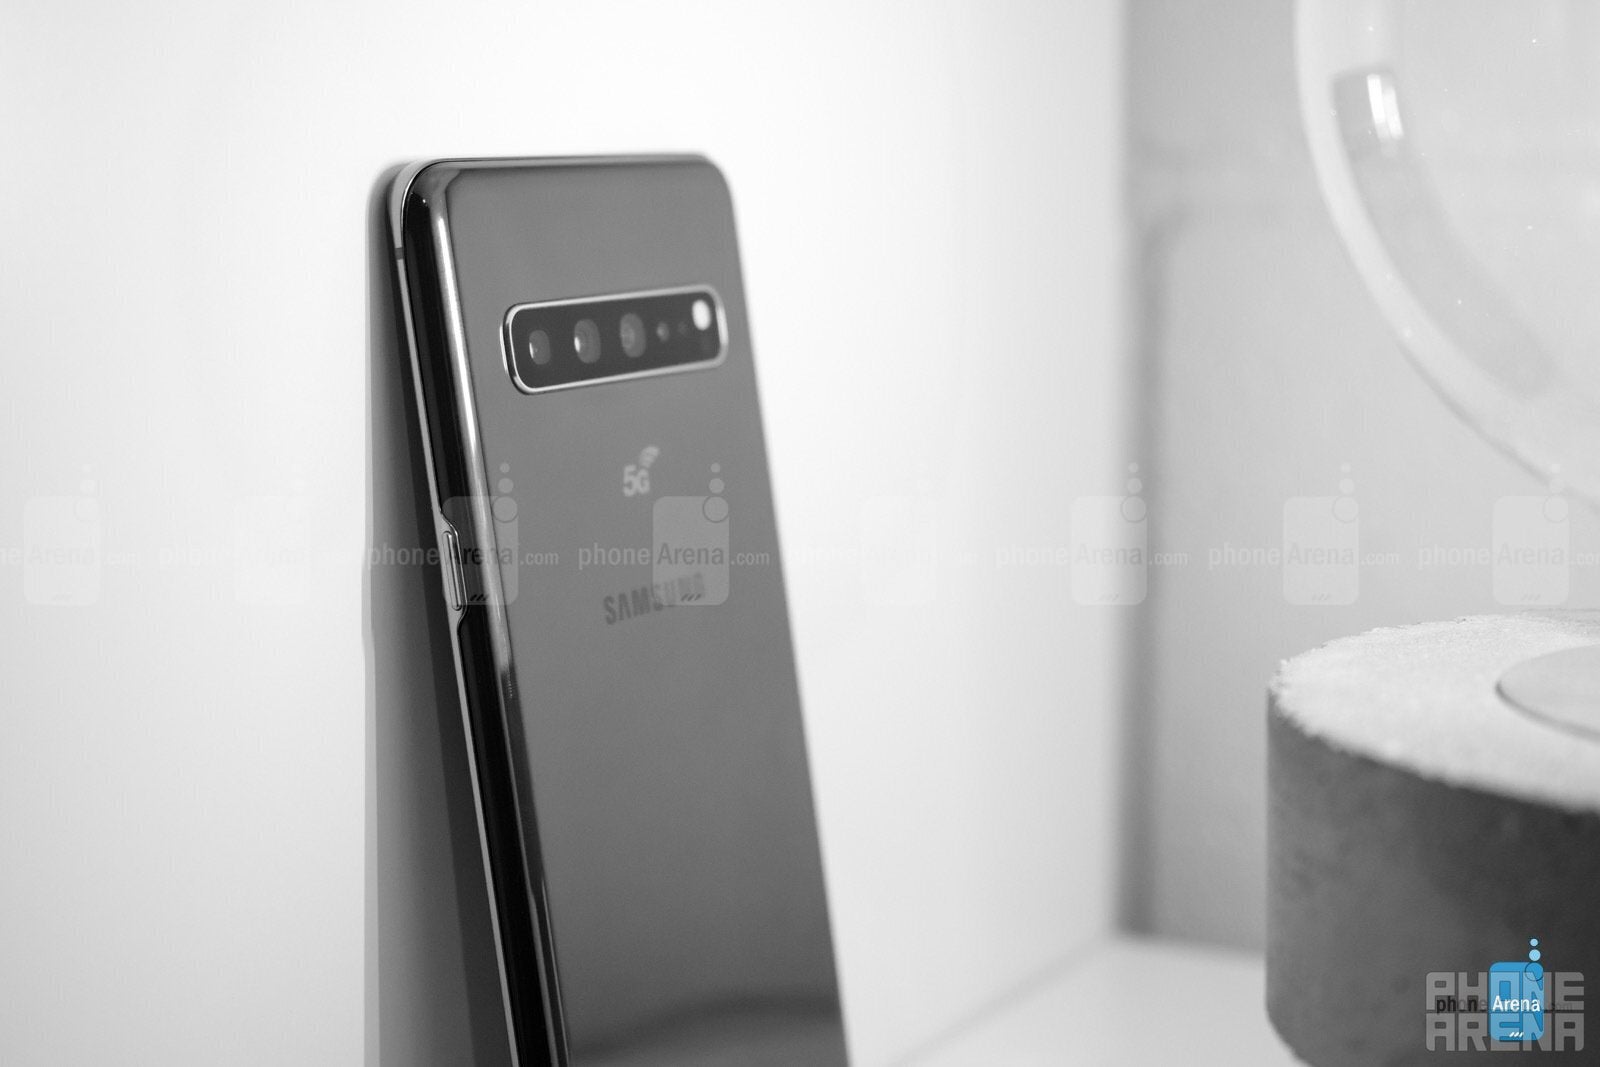 The single Galaxy S10 5G model could get three 5G-capable follow-ups - Model numbers tip off big Galaxy S11 changes and an interesting new foldable device